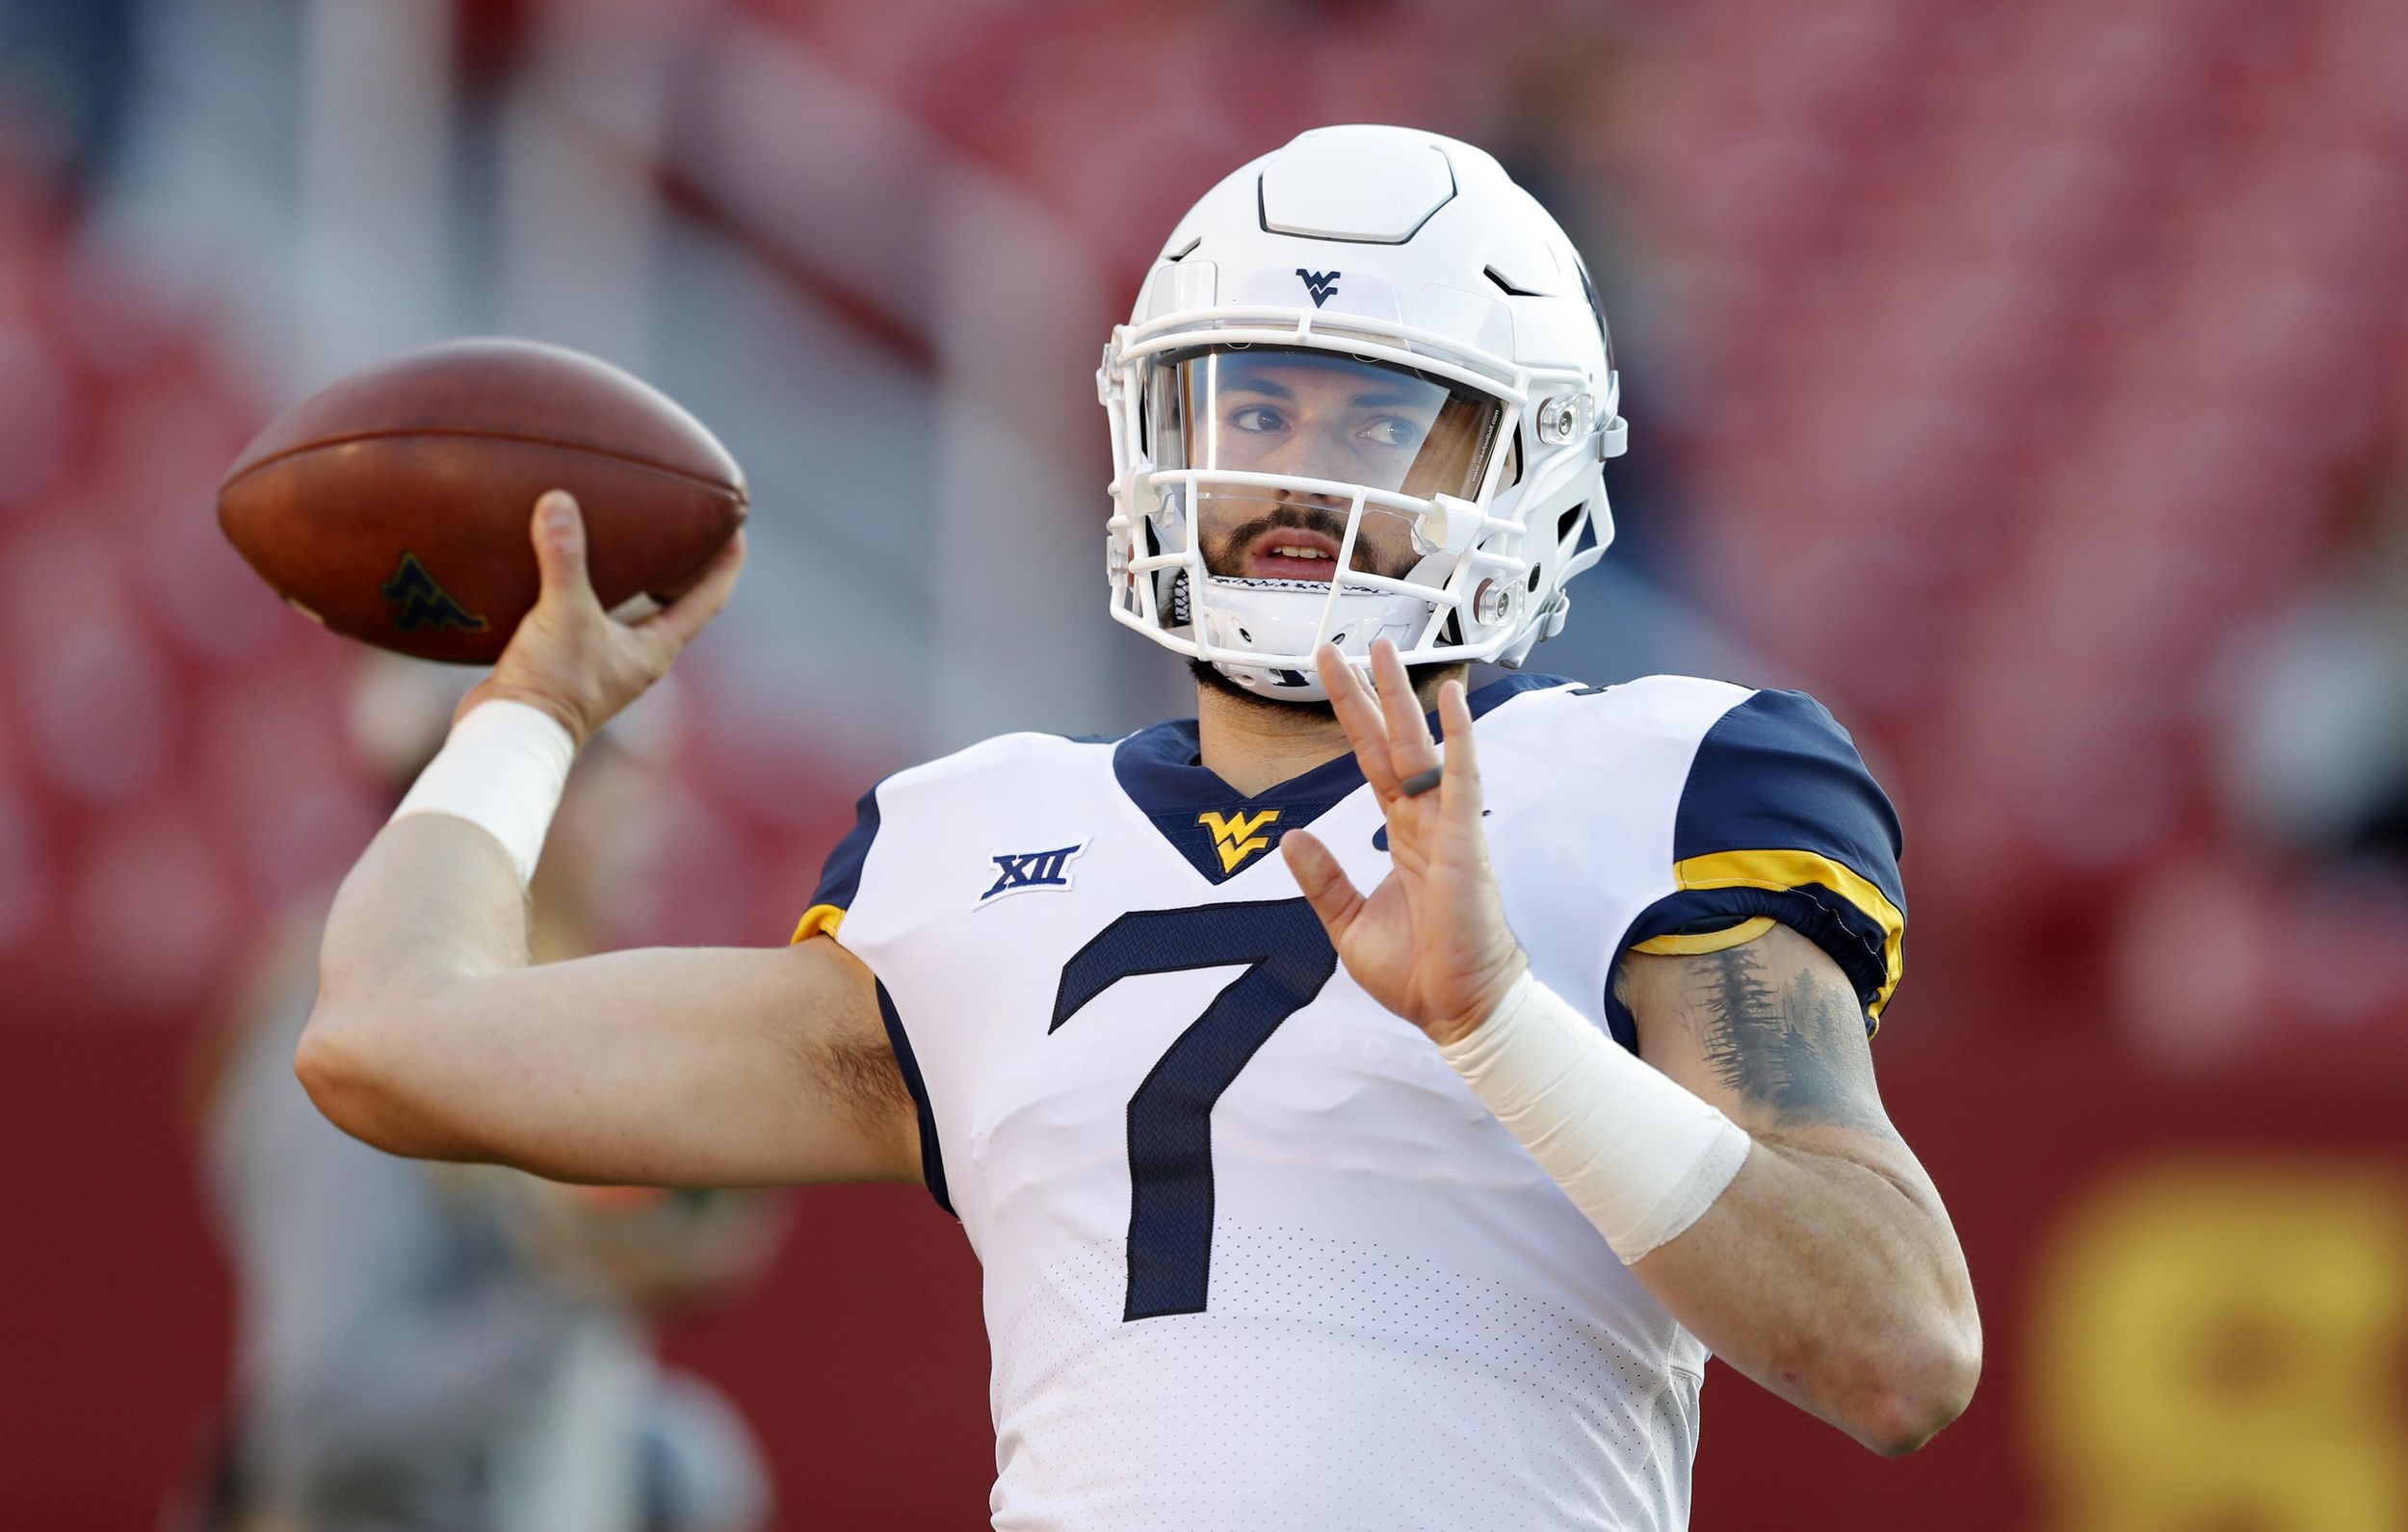 West Virginia QB Will Grier to skip bowl, prepare for NFL draft The